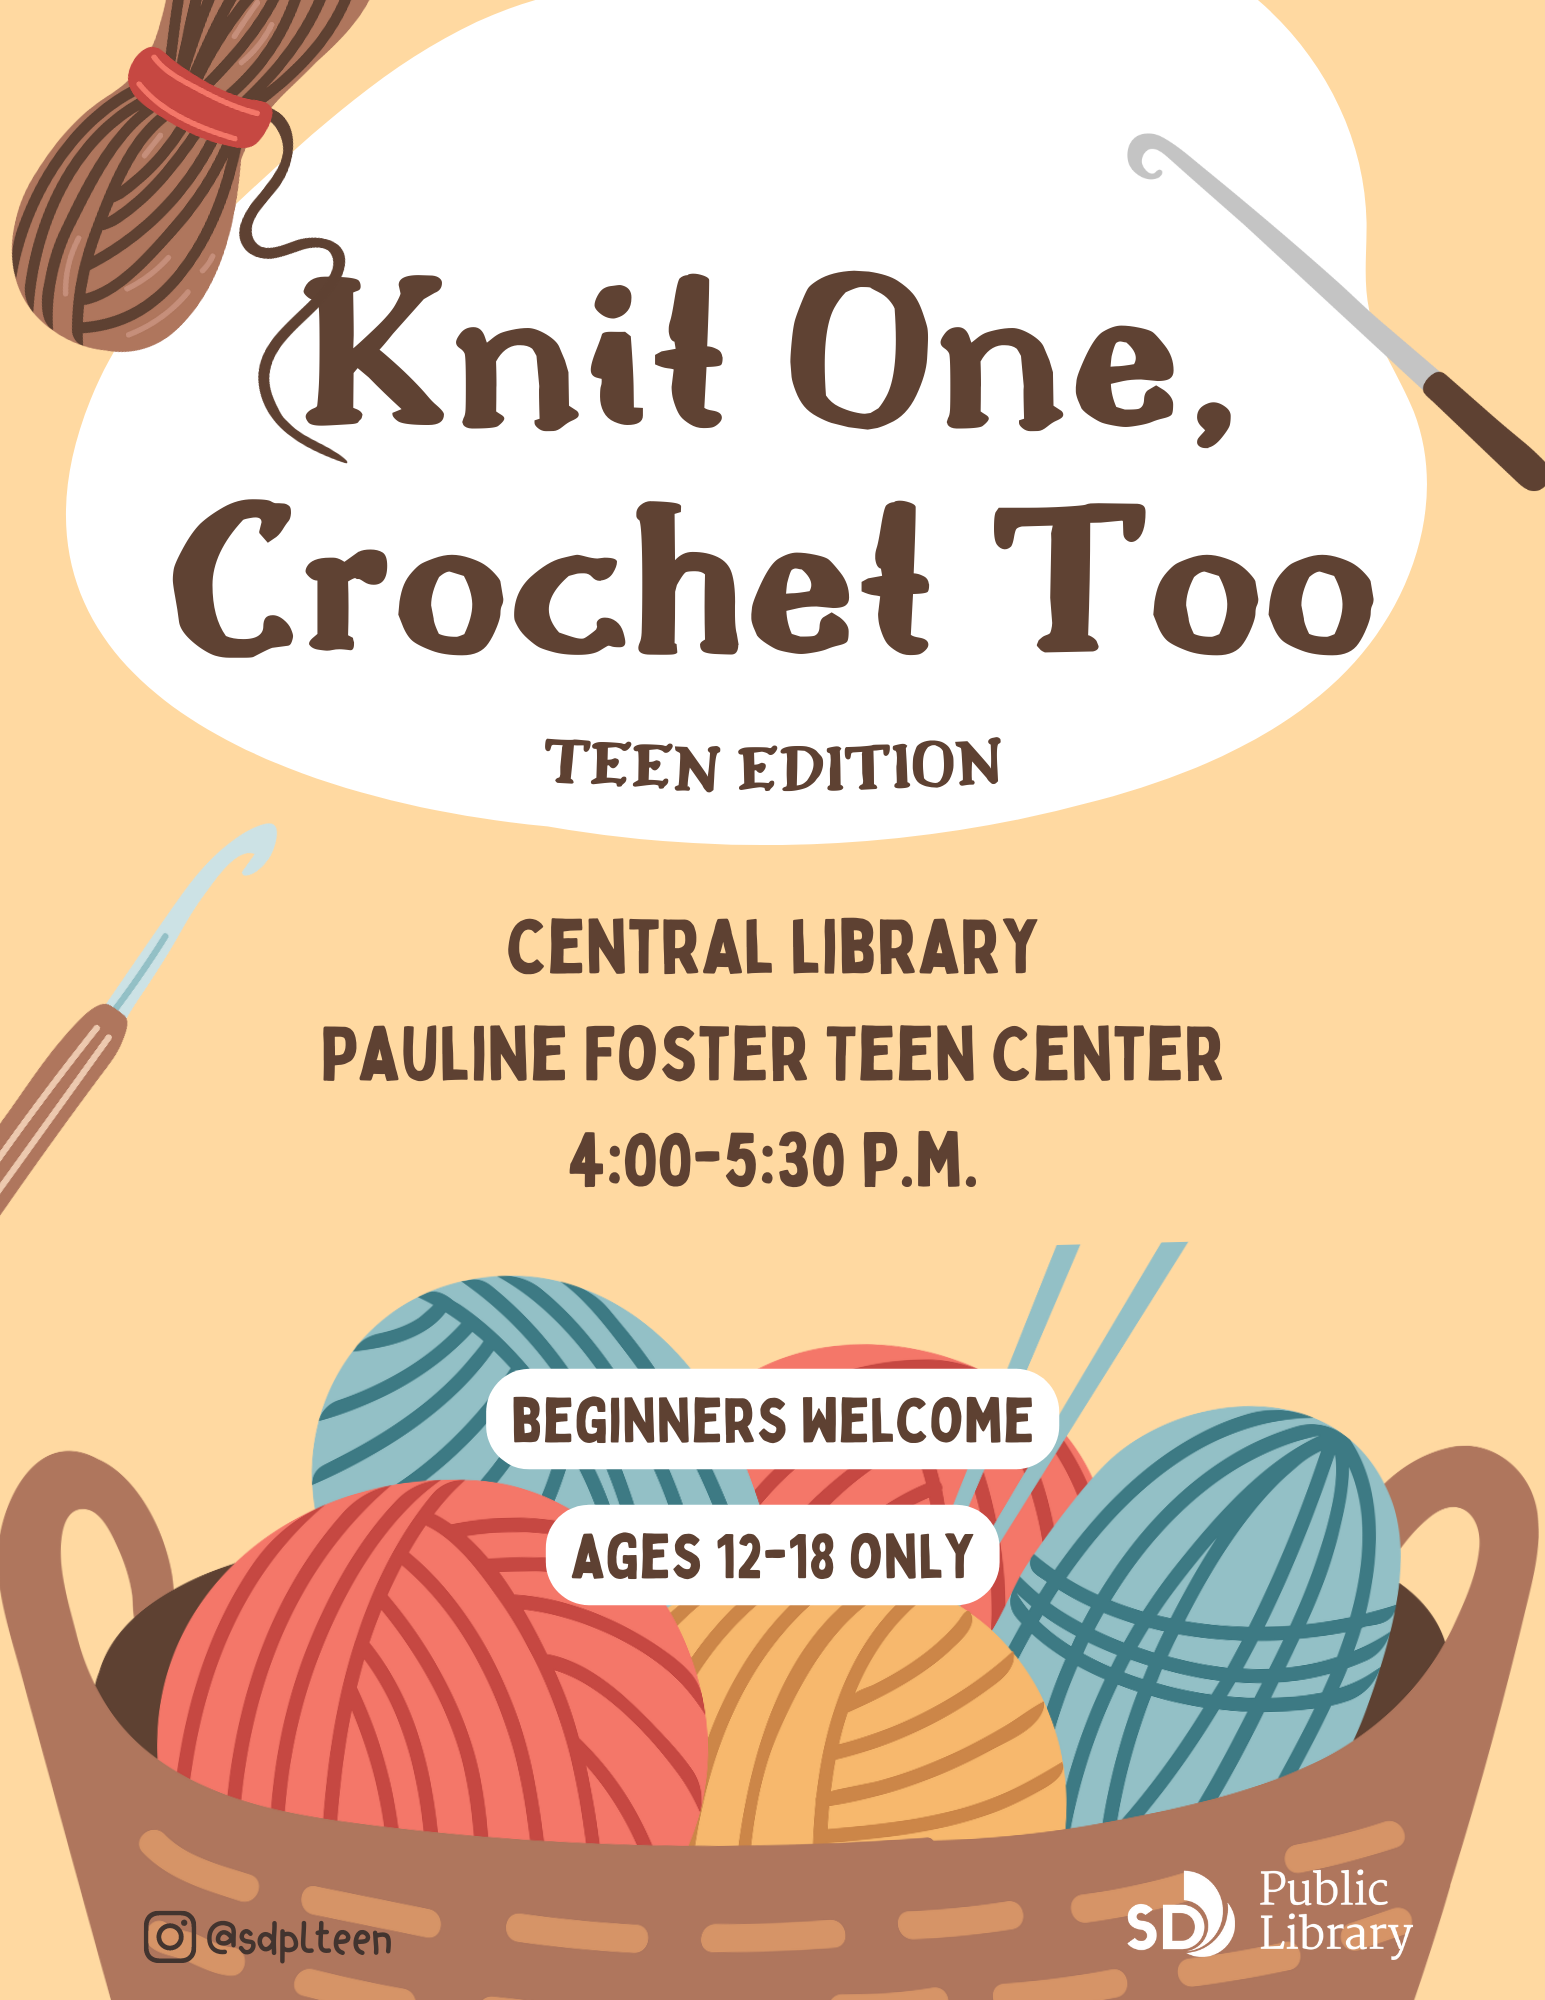 Knit One, Crochet Too (Teen Edition). Central Library, Pauline Foster Teen Center, 4-5:30pm. Beginners welcome. Ages 12-18 only.